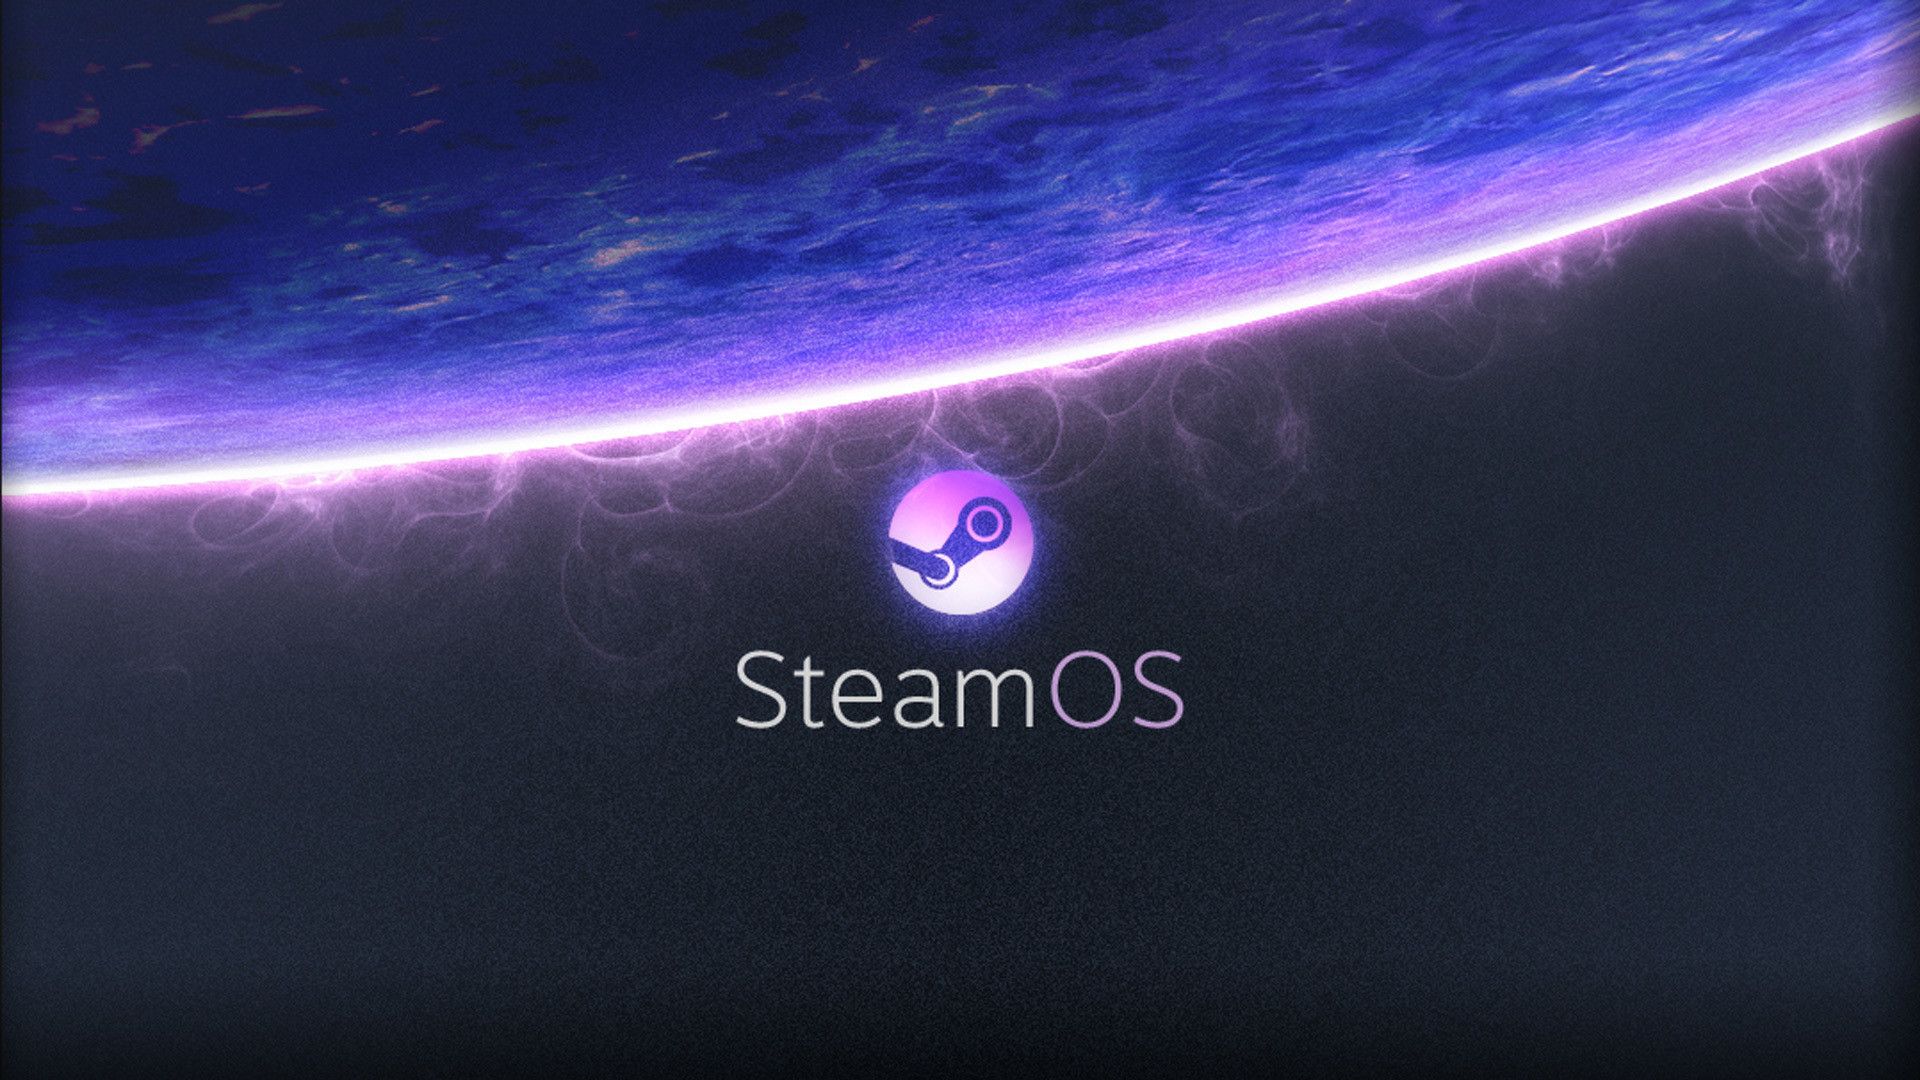 Steamos Wallpapers